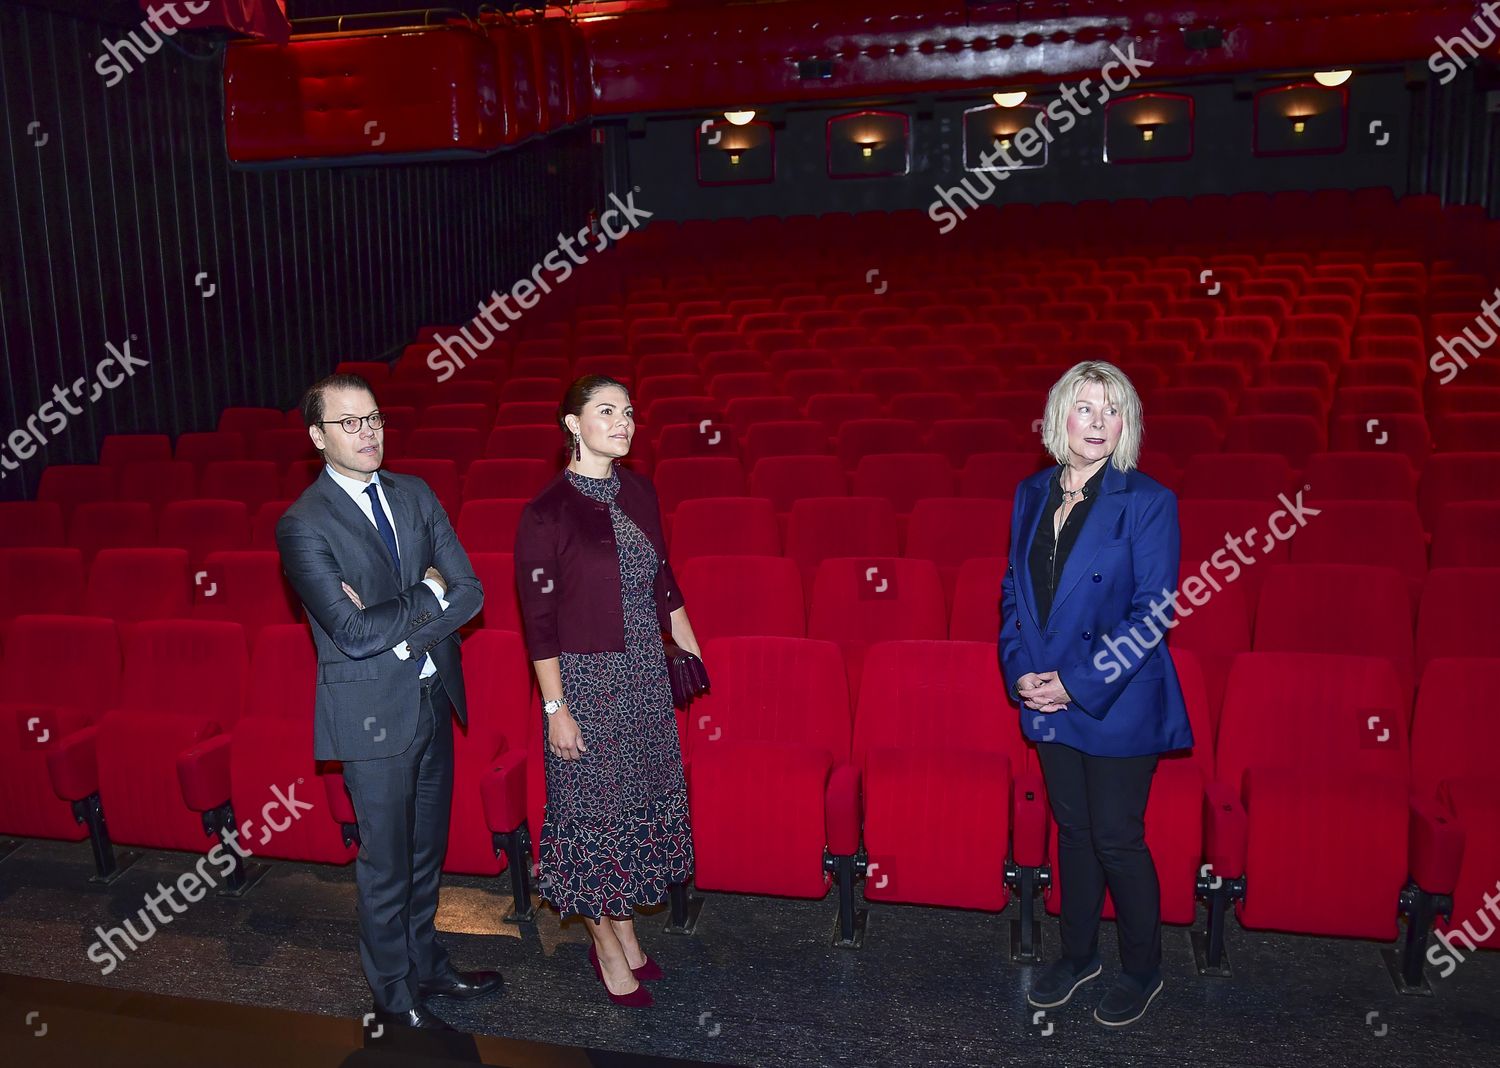 prince-daniel-and-crown-princess-victoria-visit-the-maxim-theater-stockholm-sweden-shutterstock-editorial-10817556g.jpg